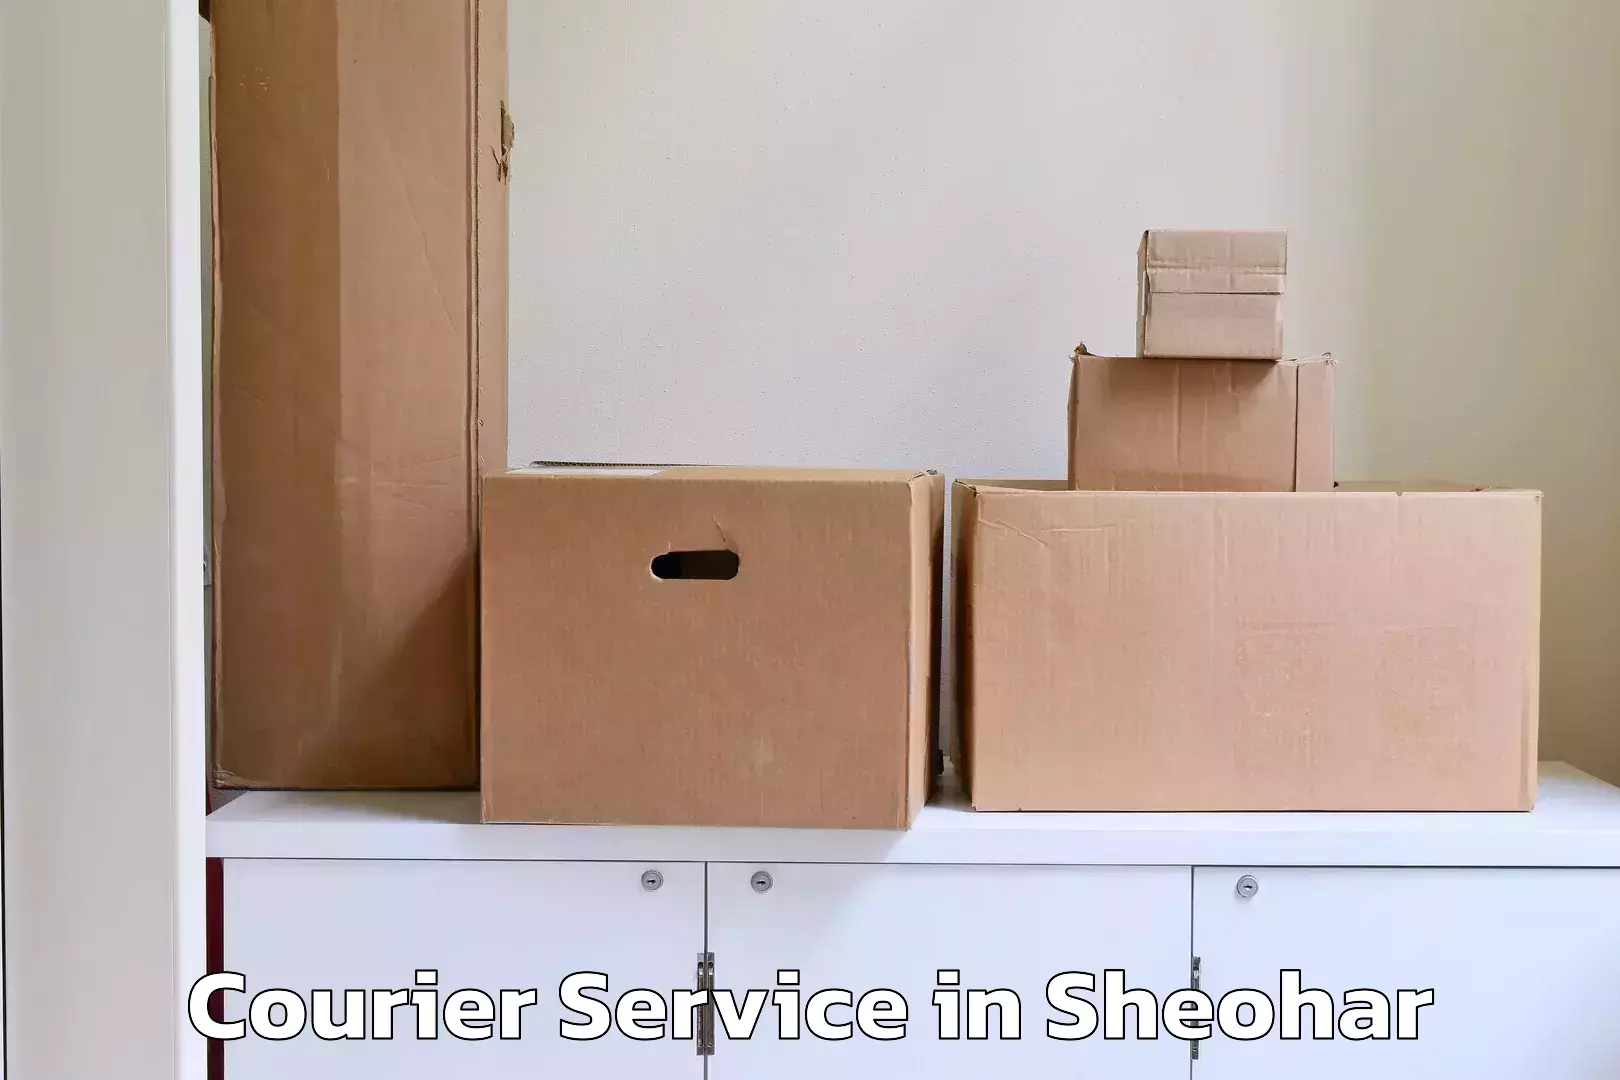 Secure package delivery in Sheohar